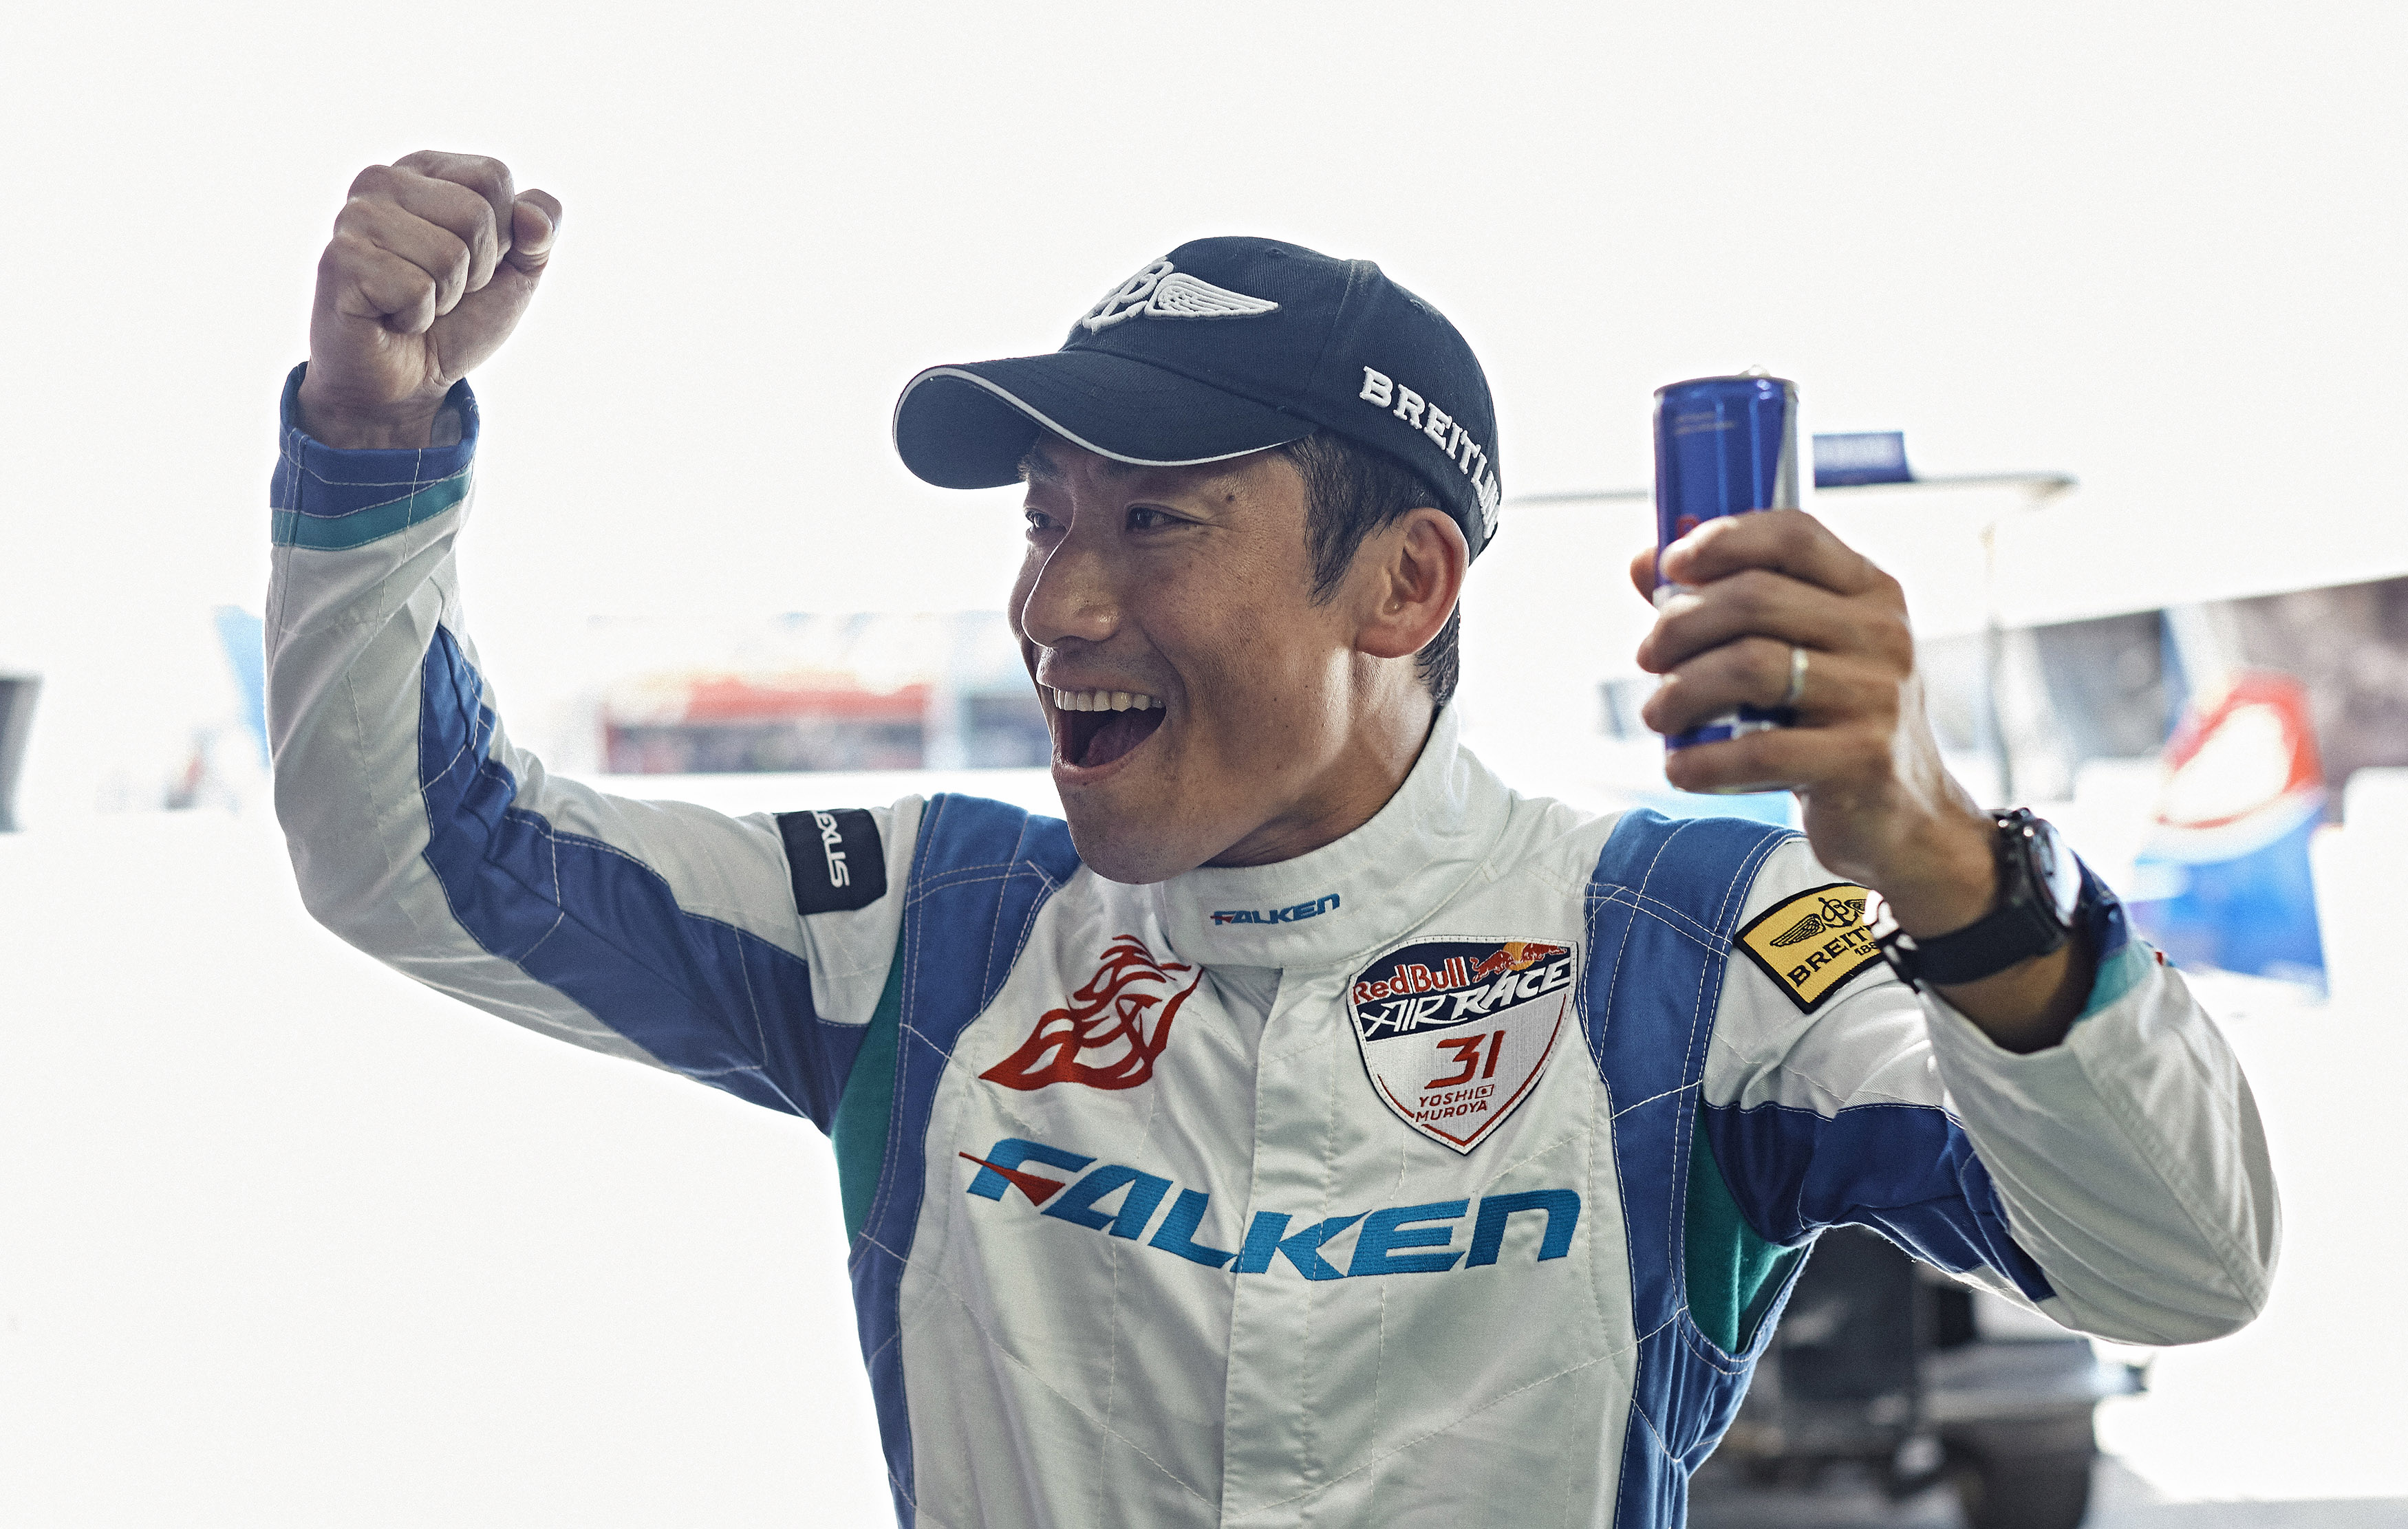 Yoshihide Muroya celebrates his victory during the finals at the second stage of the Red Bull Air Race World Championship in San Diego. Photo courtesy of Balazs Gardi/Red Bull Content Pool